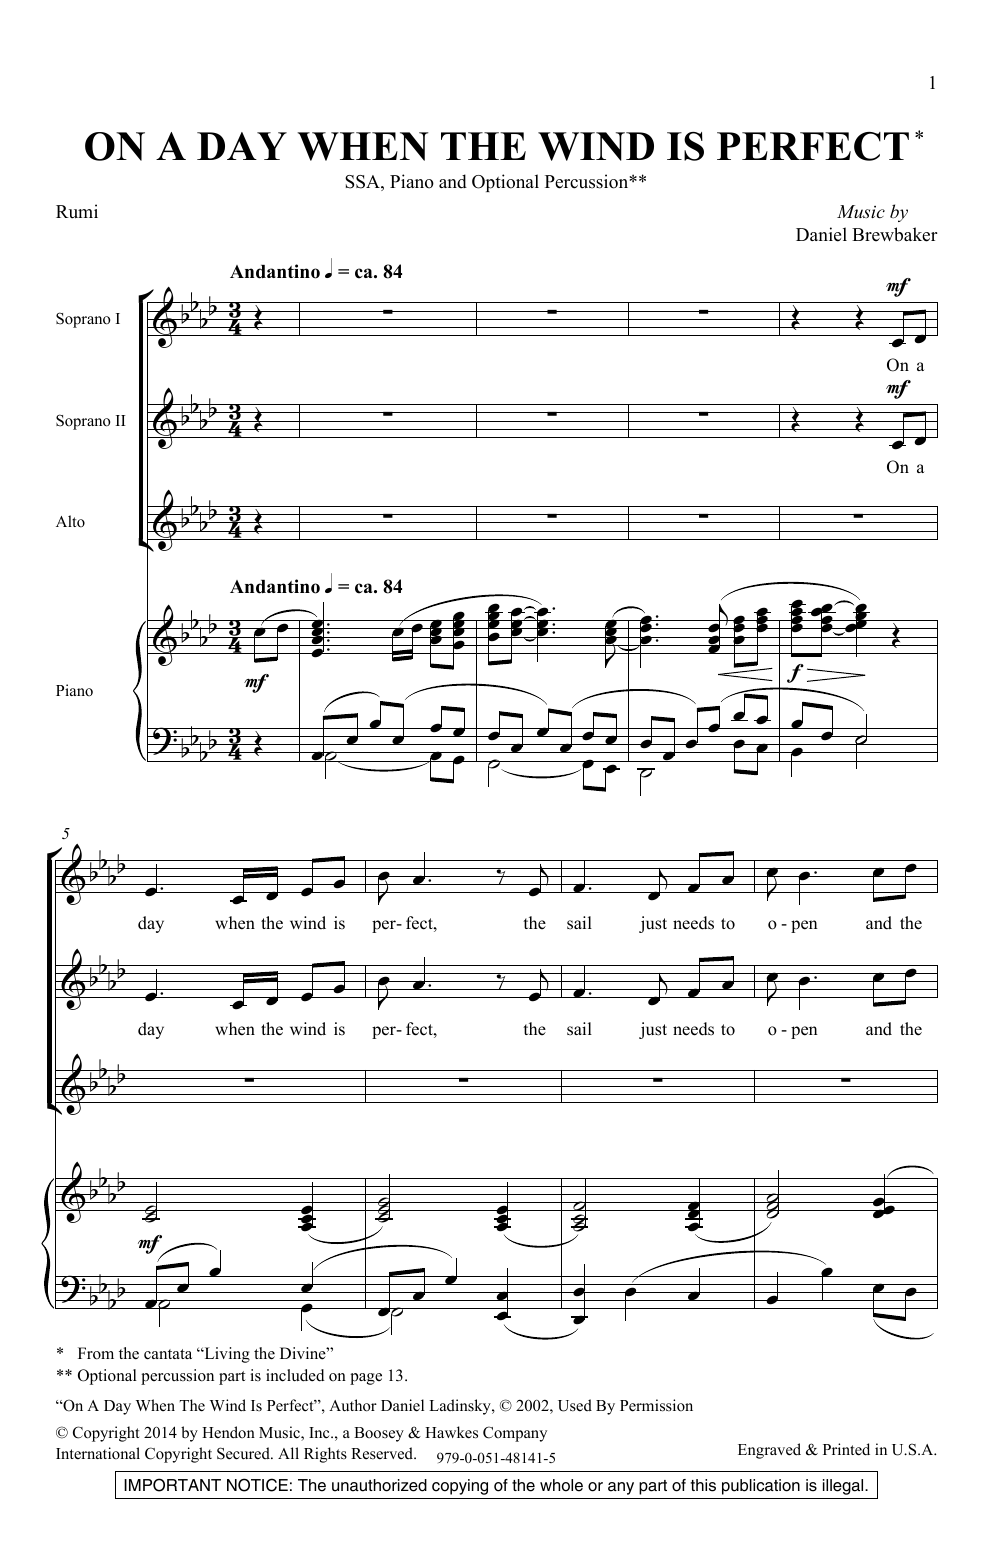 Download Daniel Brewbaker On A Day When The Wind Is Perfect Sheet Music